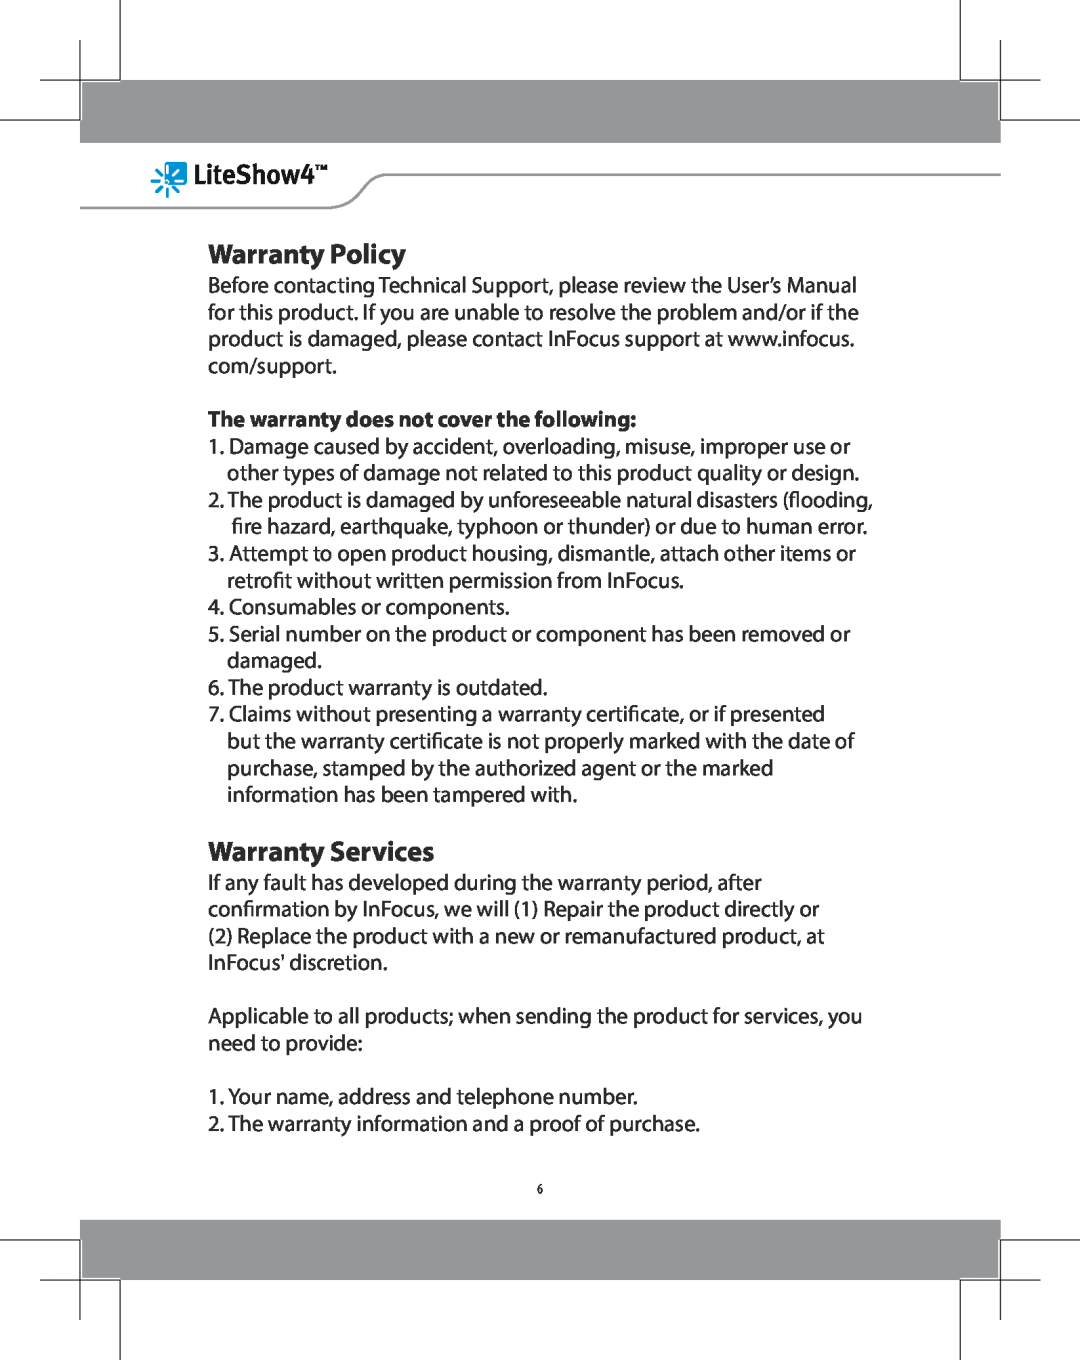 InFocus INLITESHOW4 manual The warranty does not cover the following, Warranty Policy, Warranty Services 